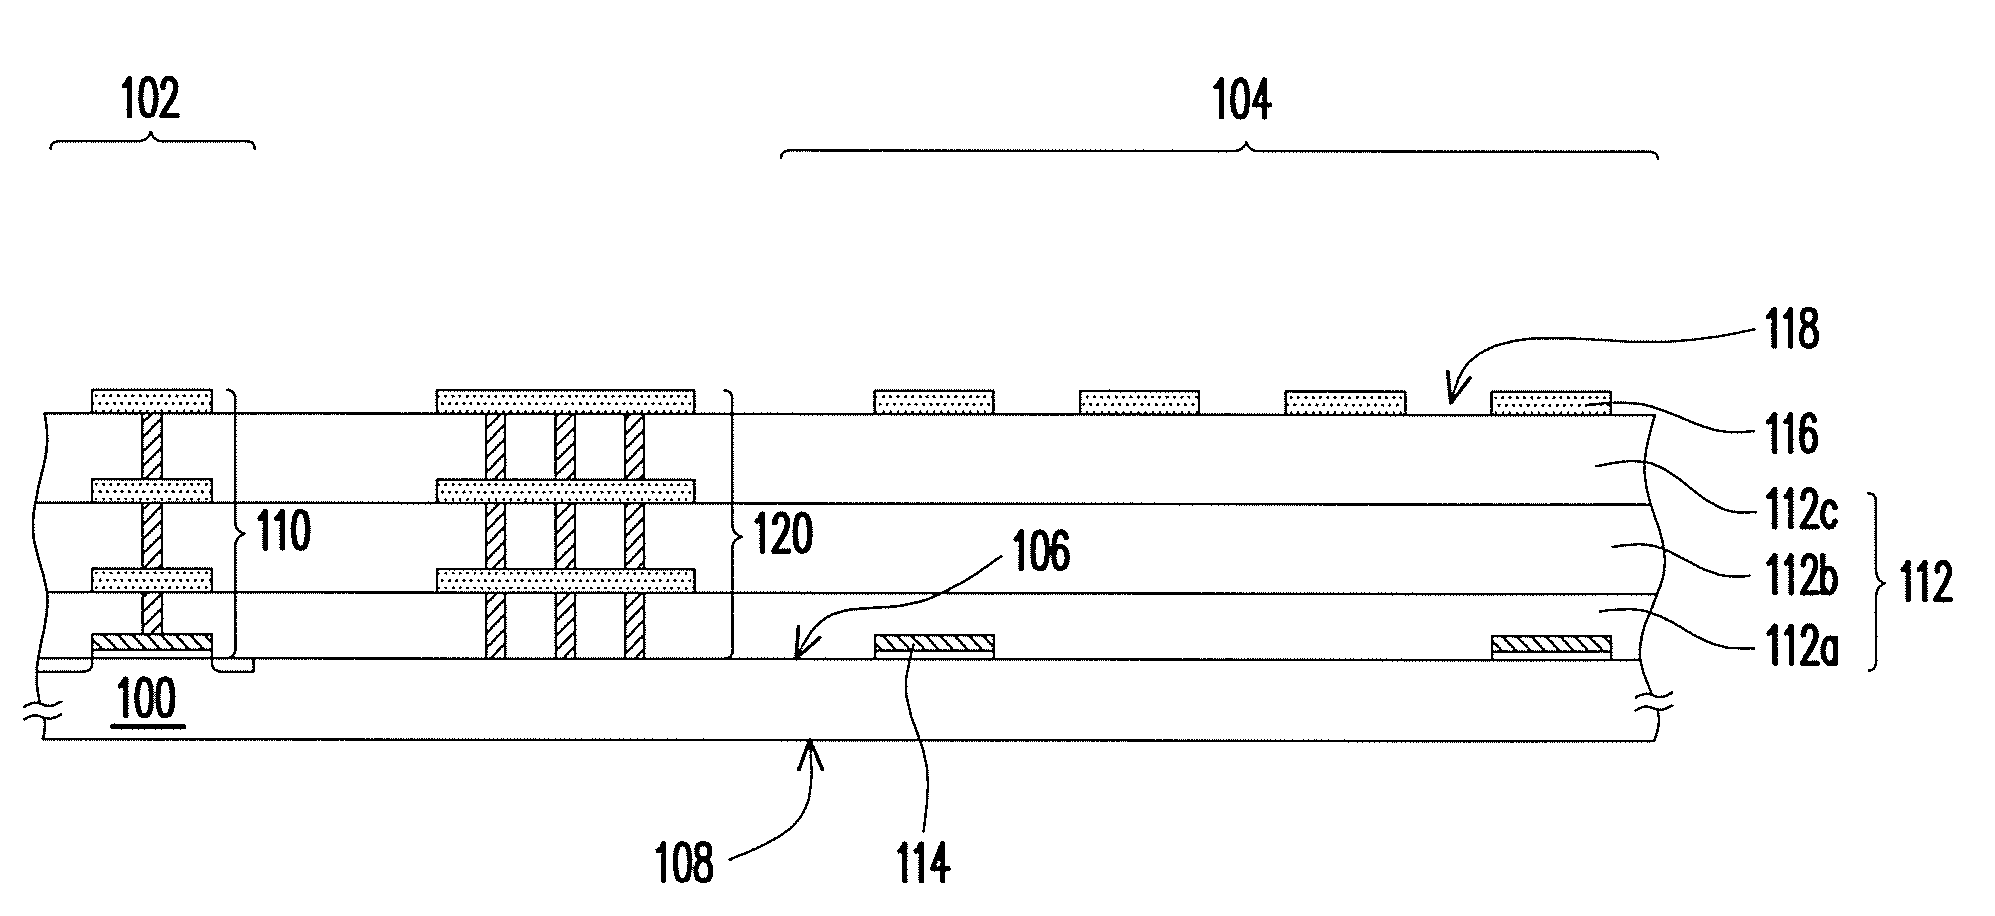 Structure of MEMS electroacoustic transducer and fabricating method thereof